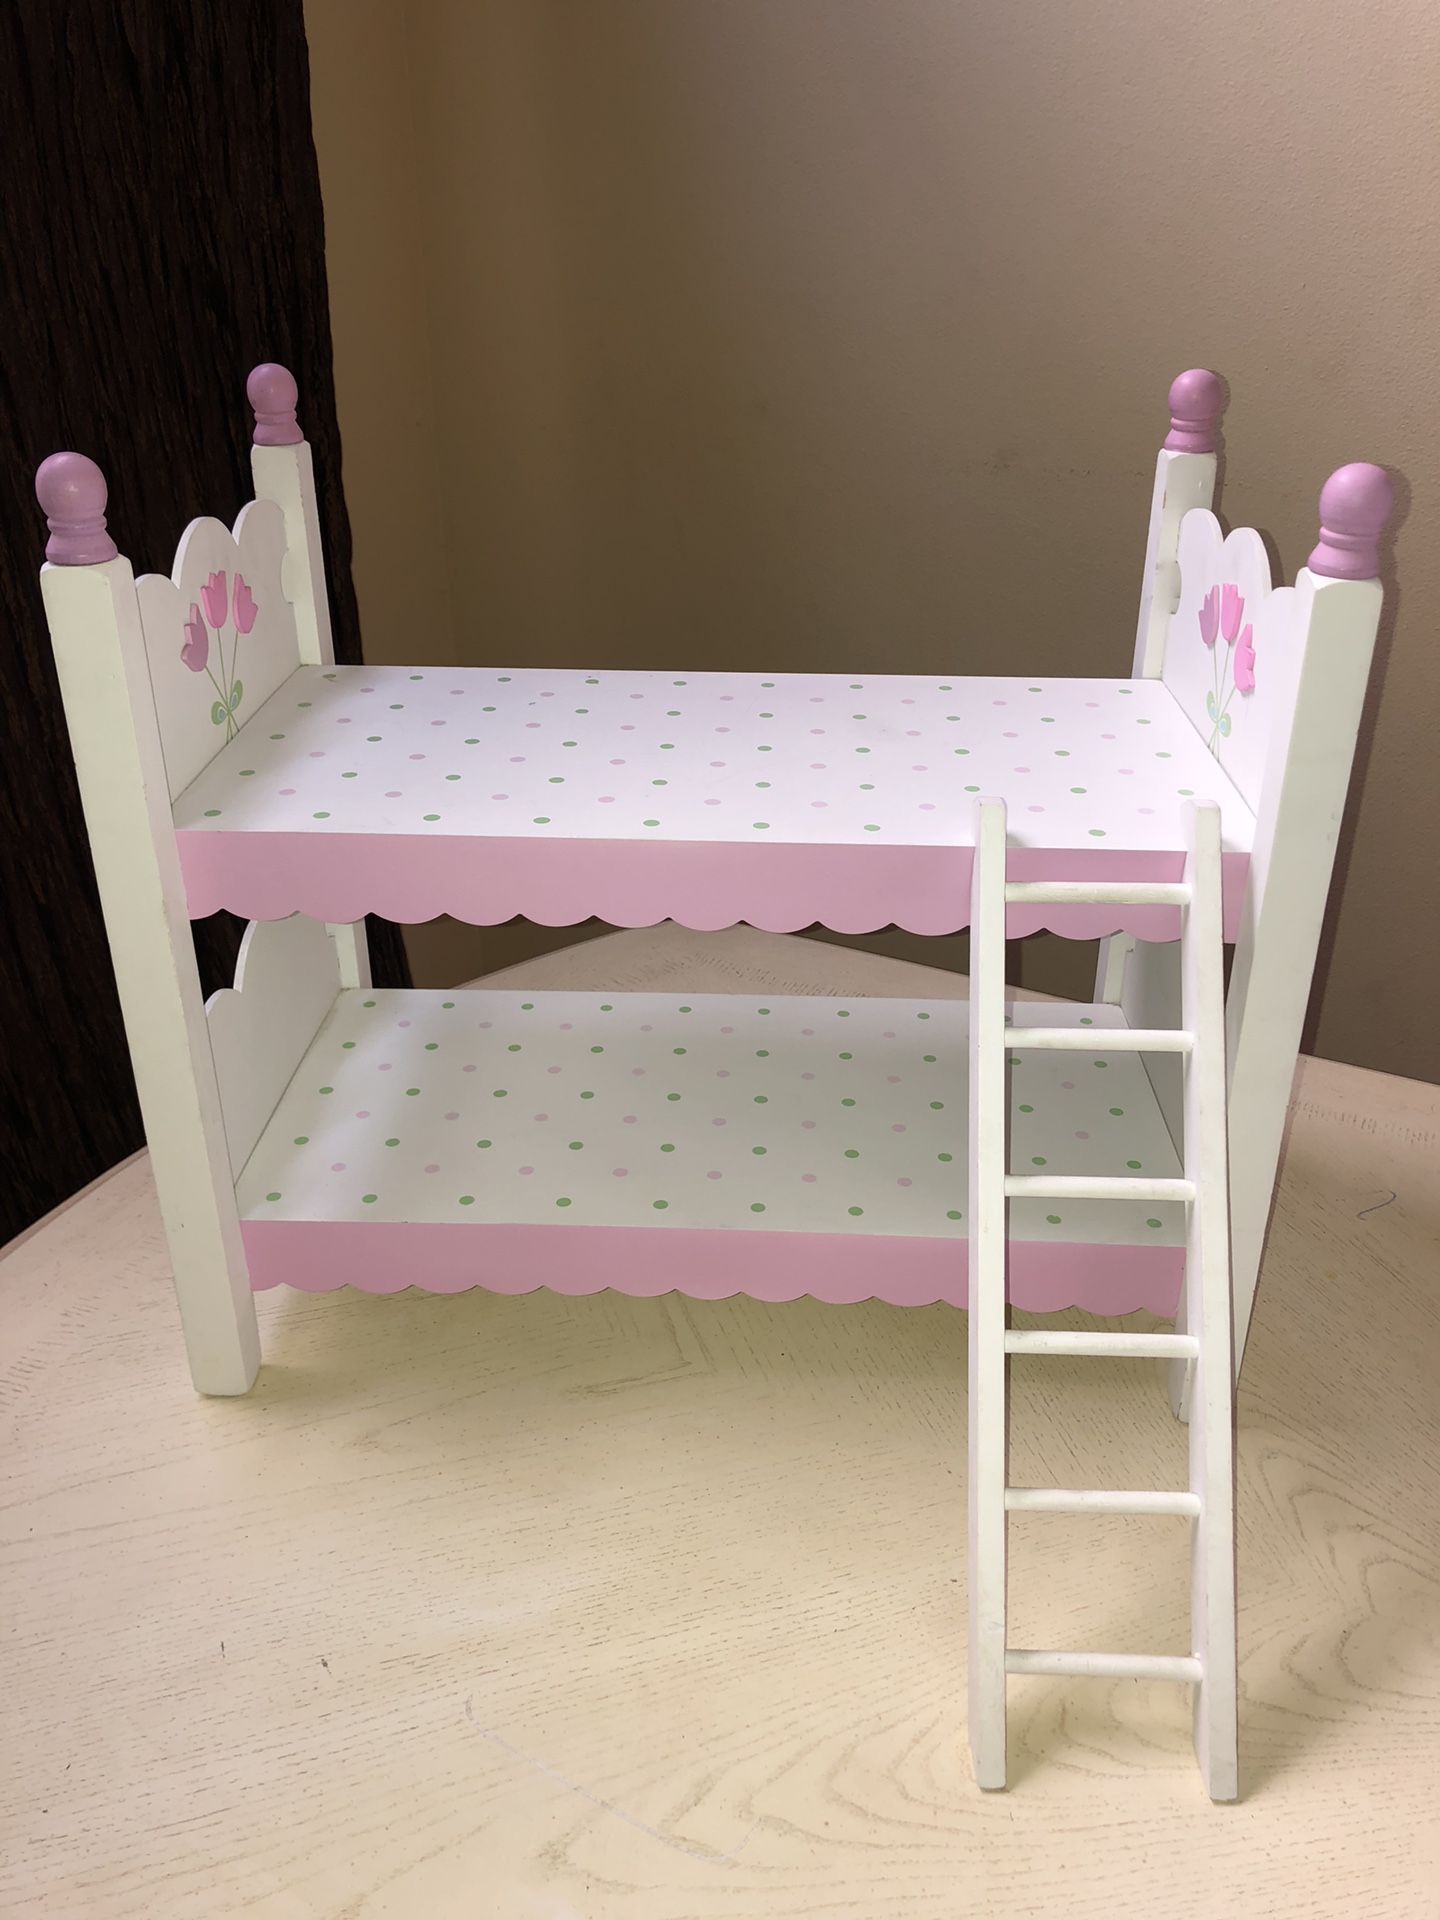 Doll bunk bed and bedding for 18” American Girl Dolls